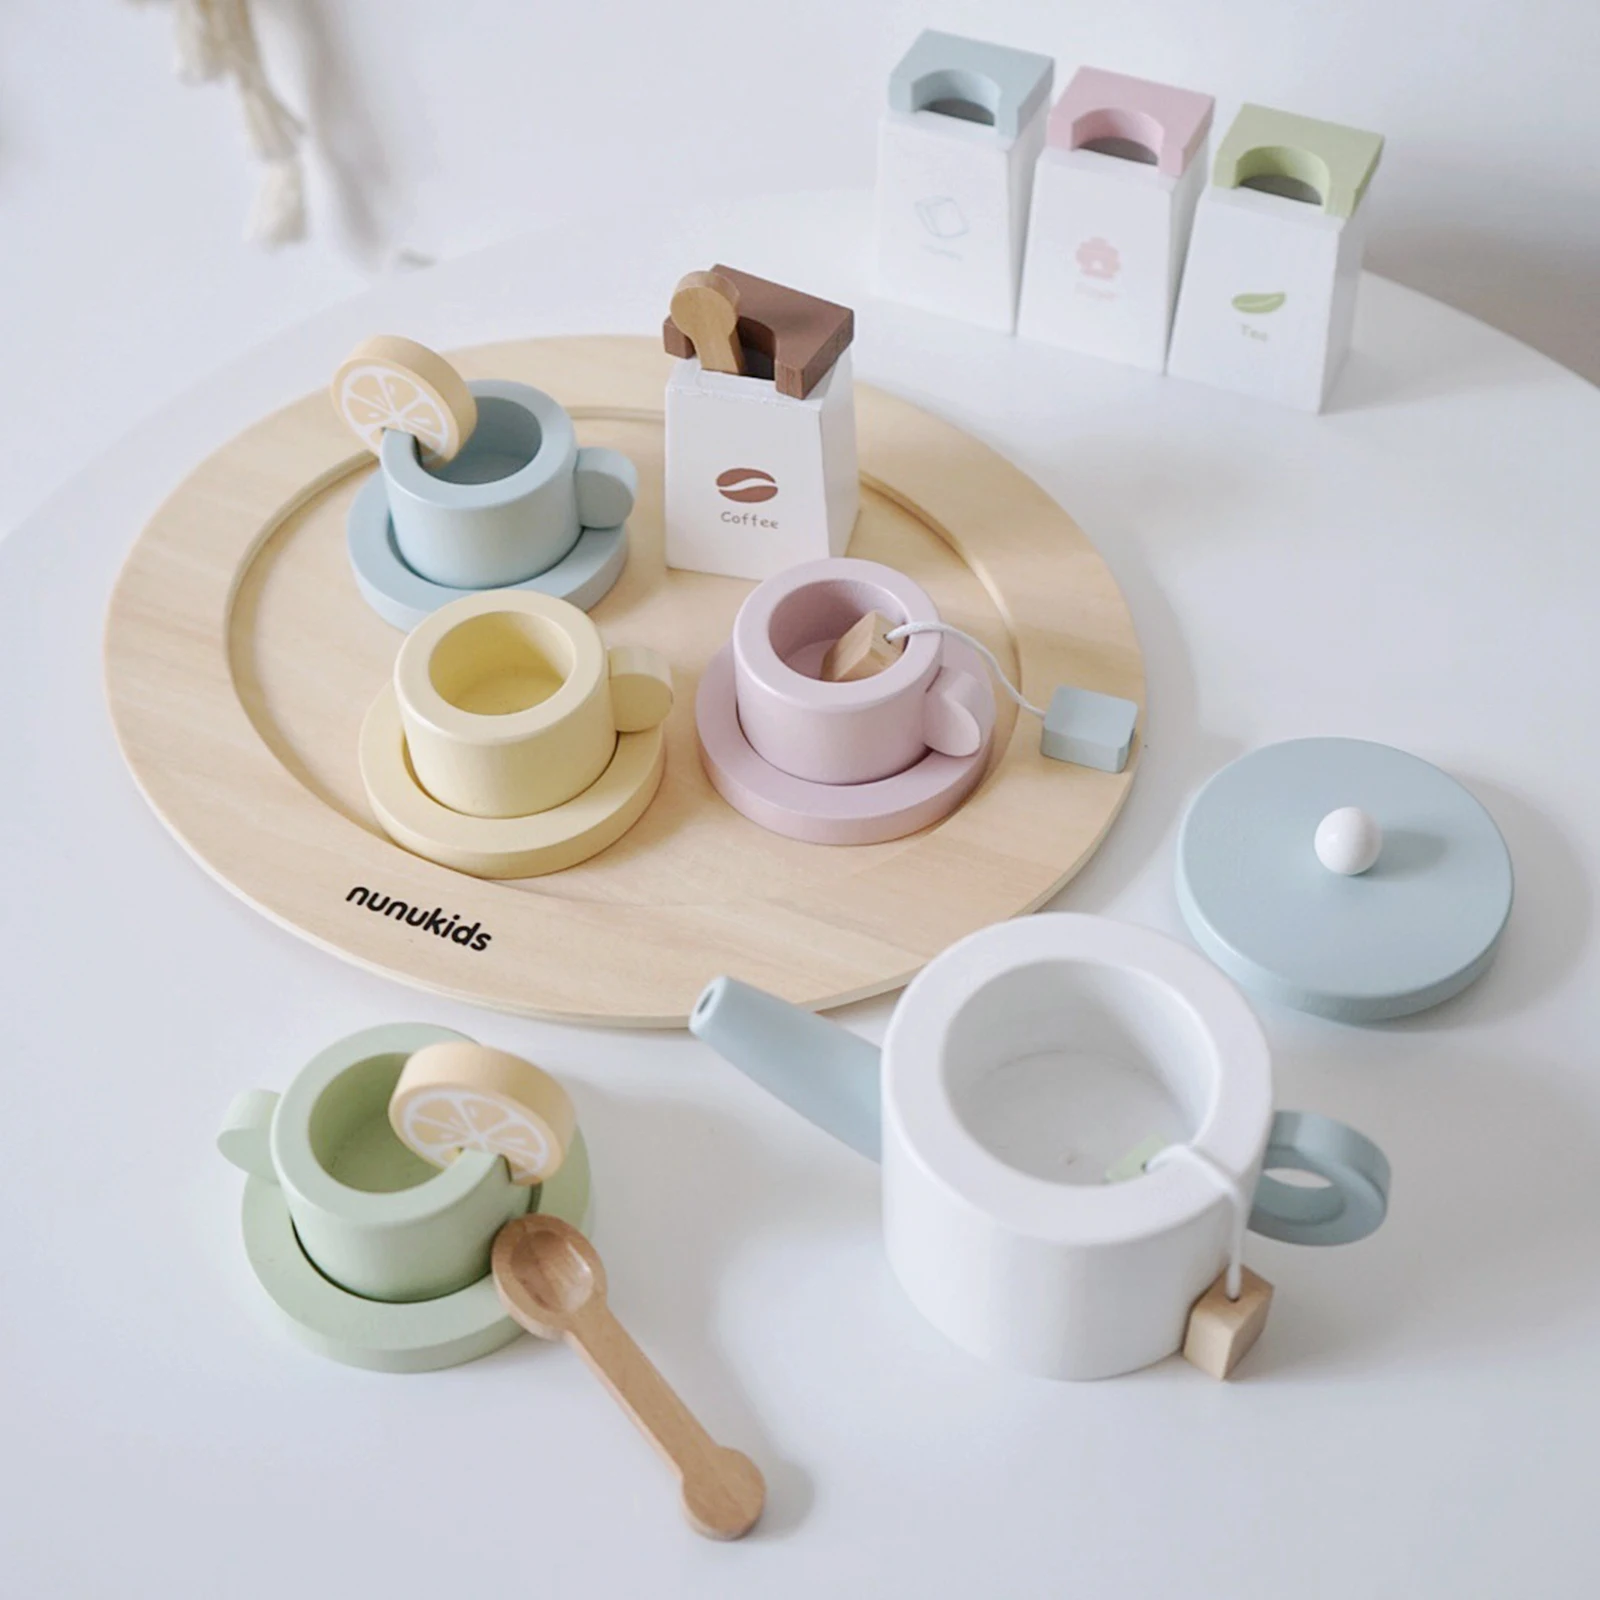 16pcs Wooden Tableware Toy Set Cup Tray Pretend Play Developmental Toy